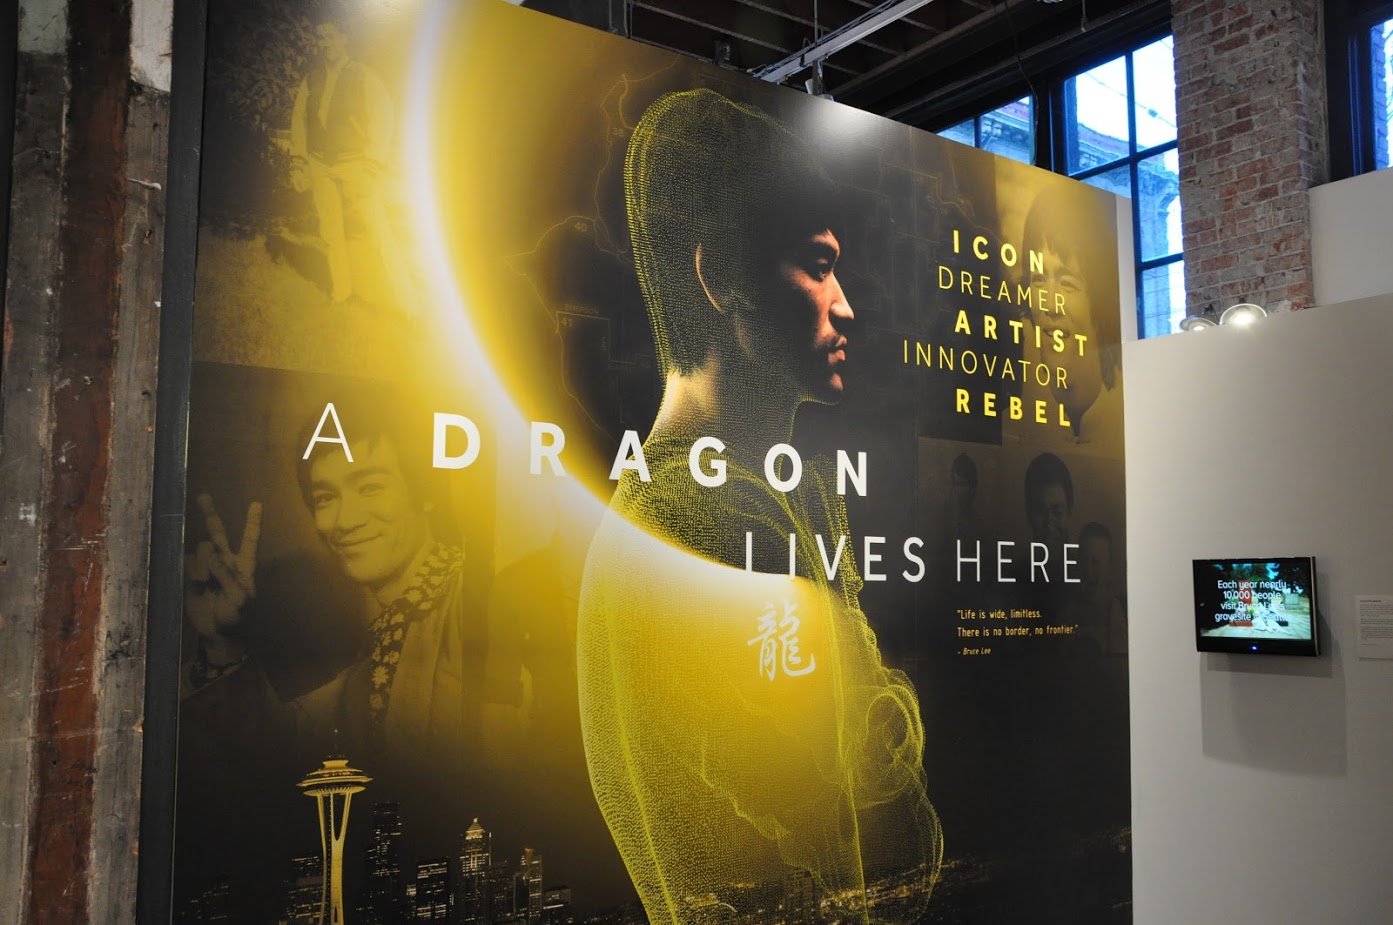 Bruce Lee exhibit at Wing Luke continues with 4th installment